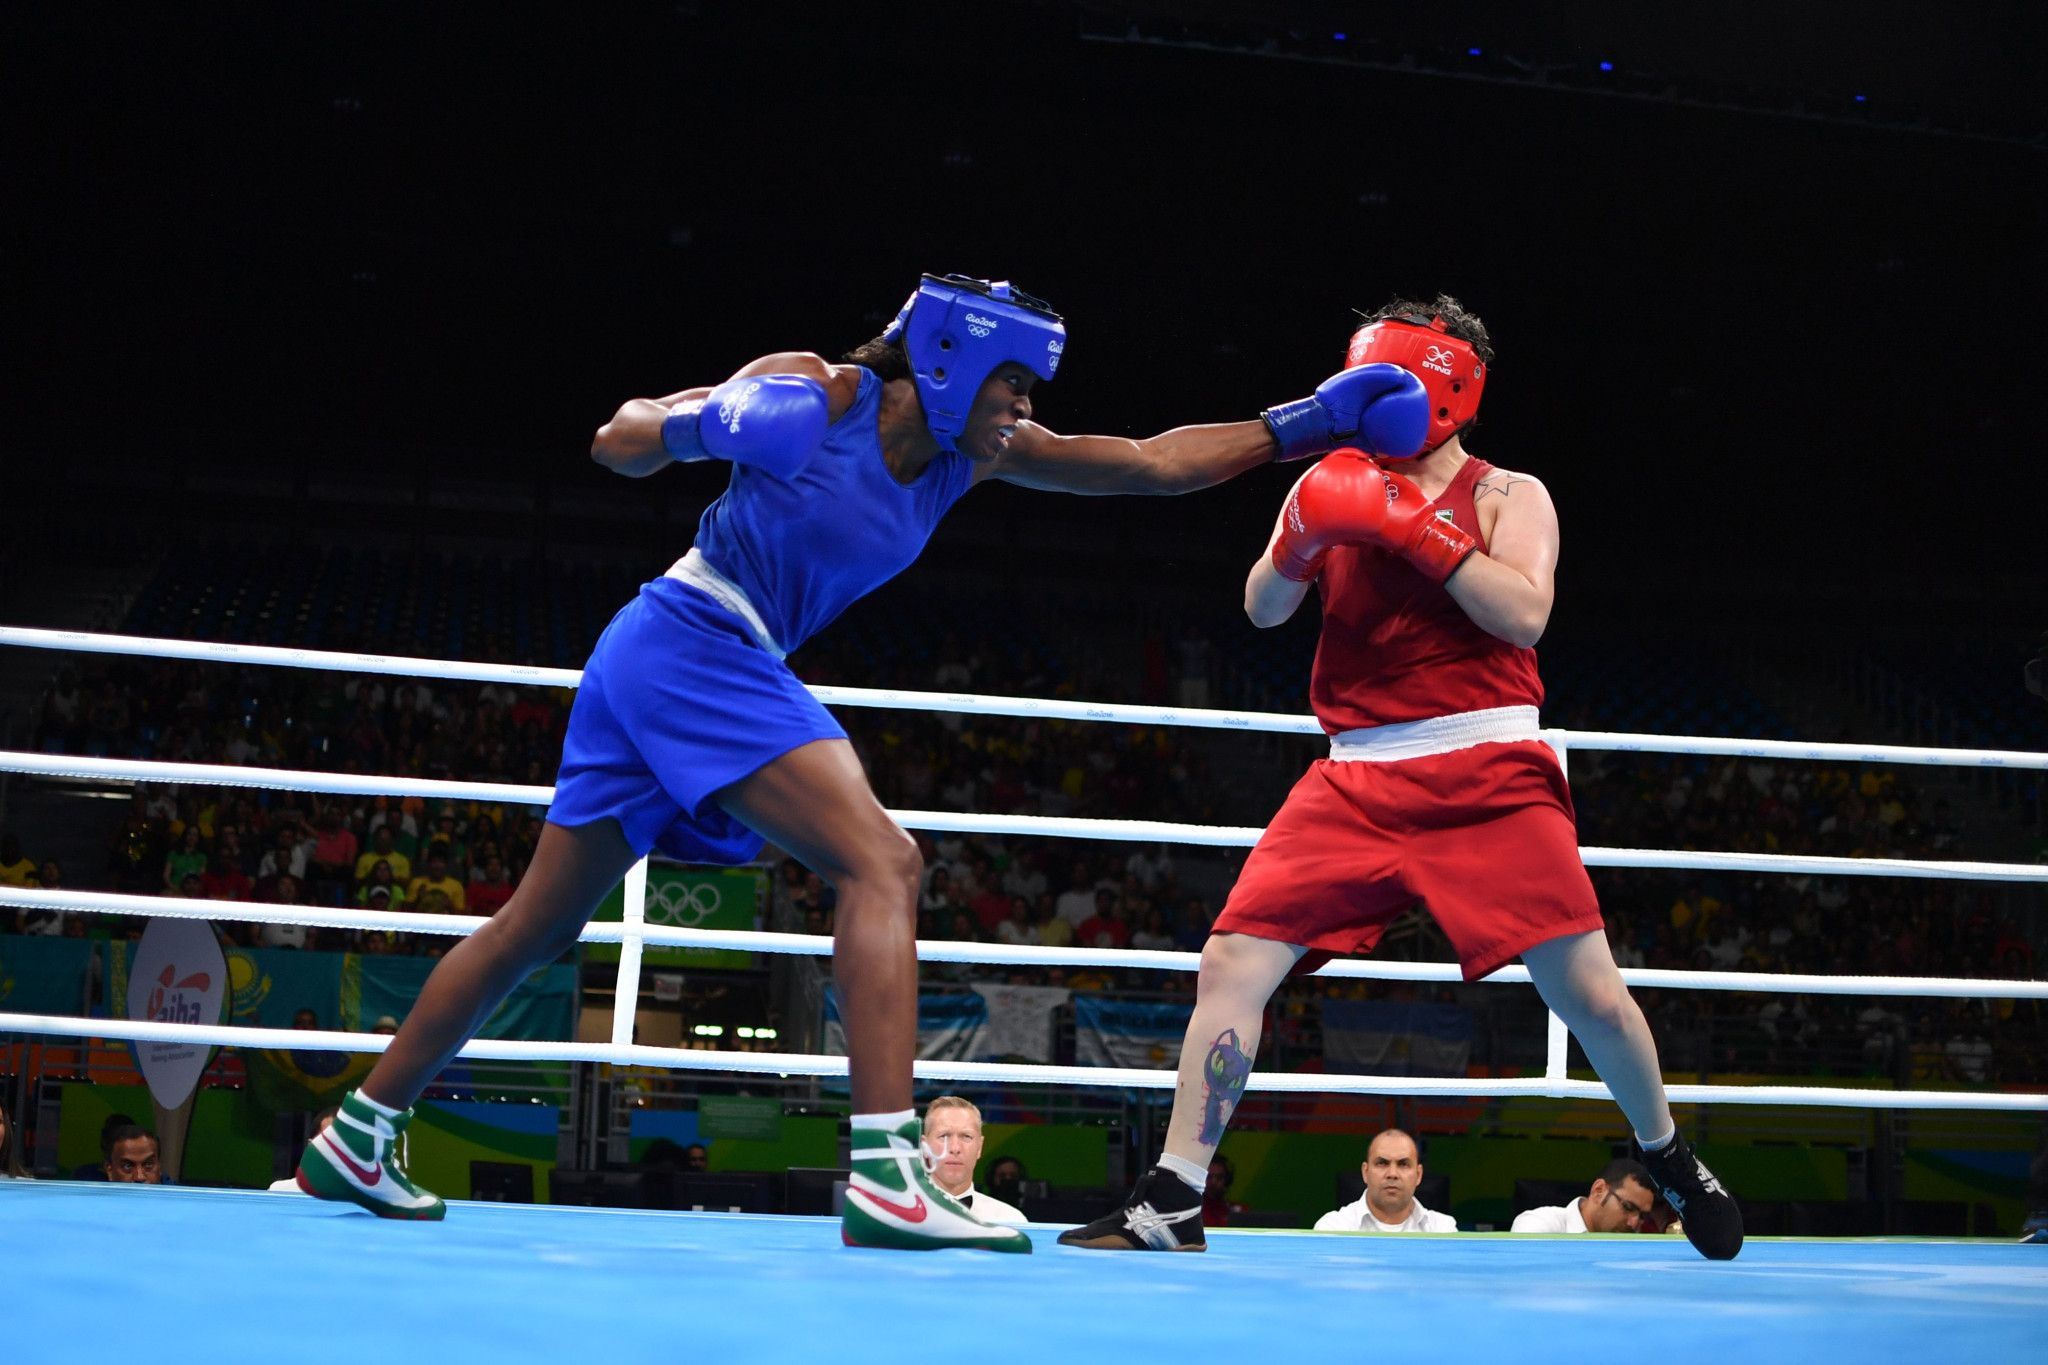 Crisis-hit AIBA announce diversity in boxing programme to aid National Federations